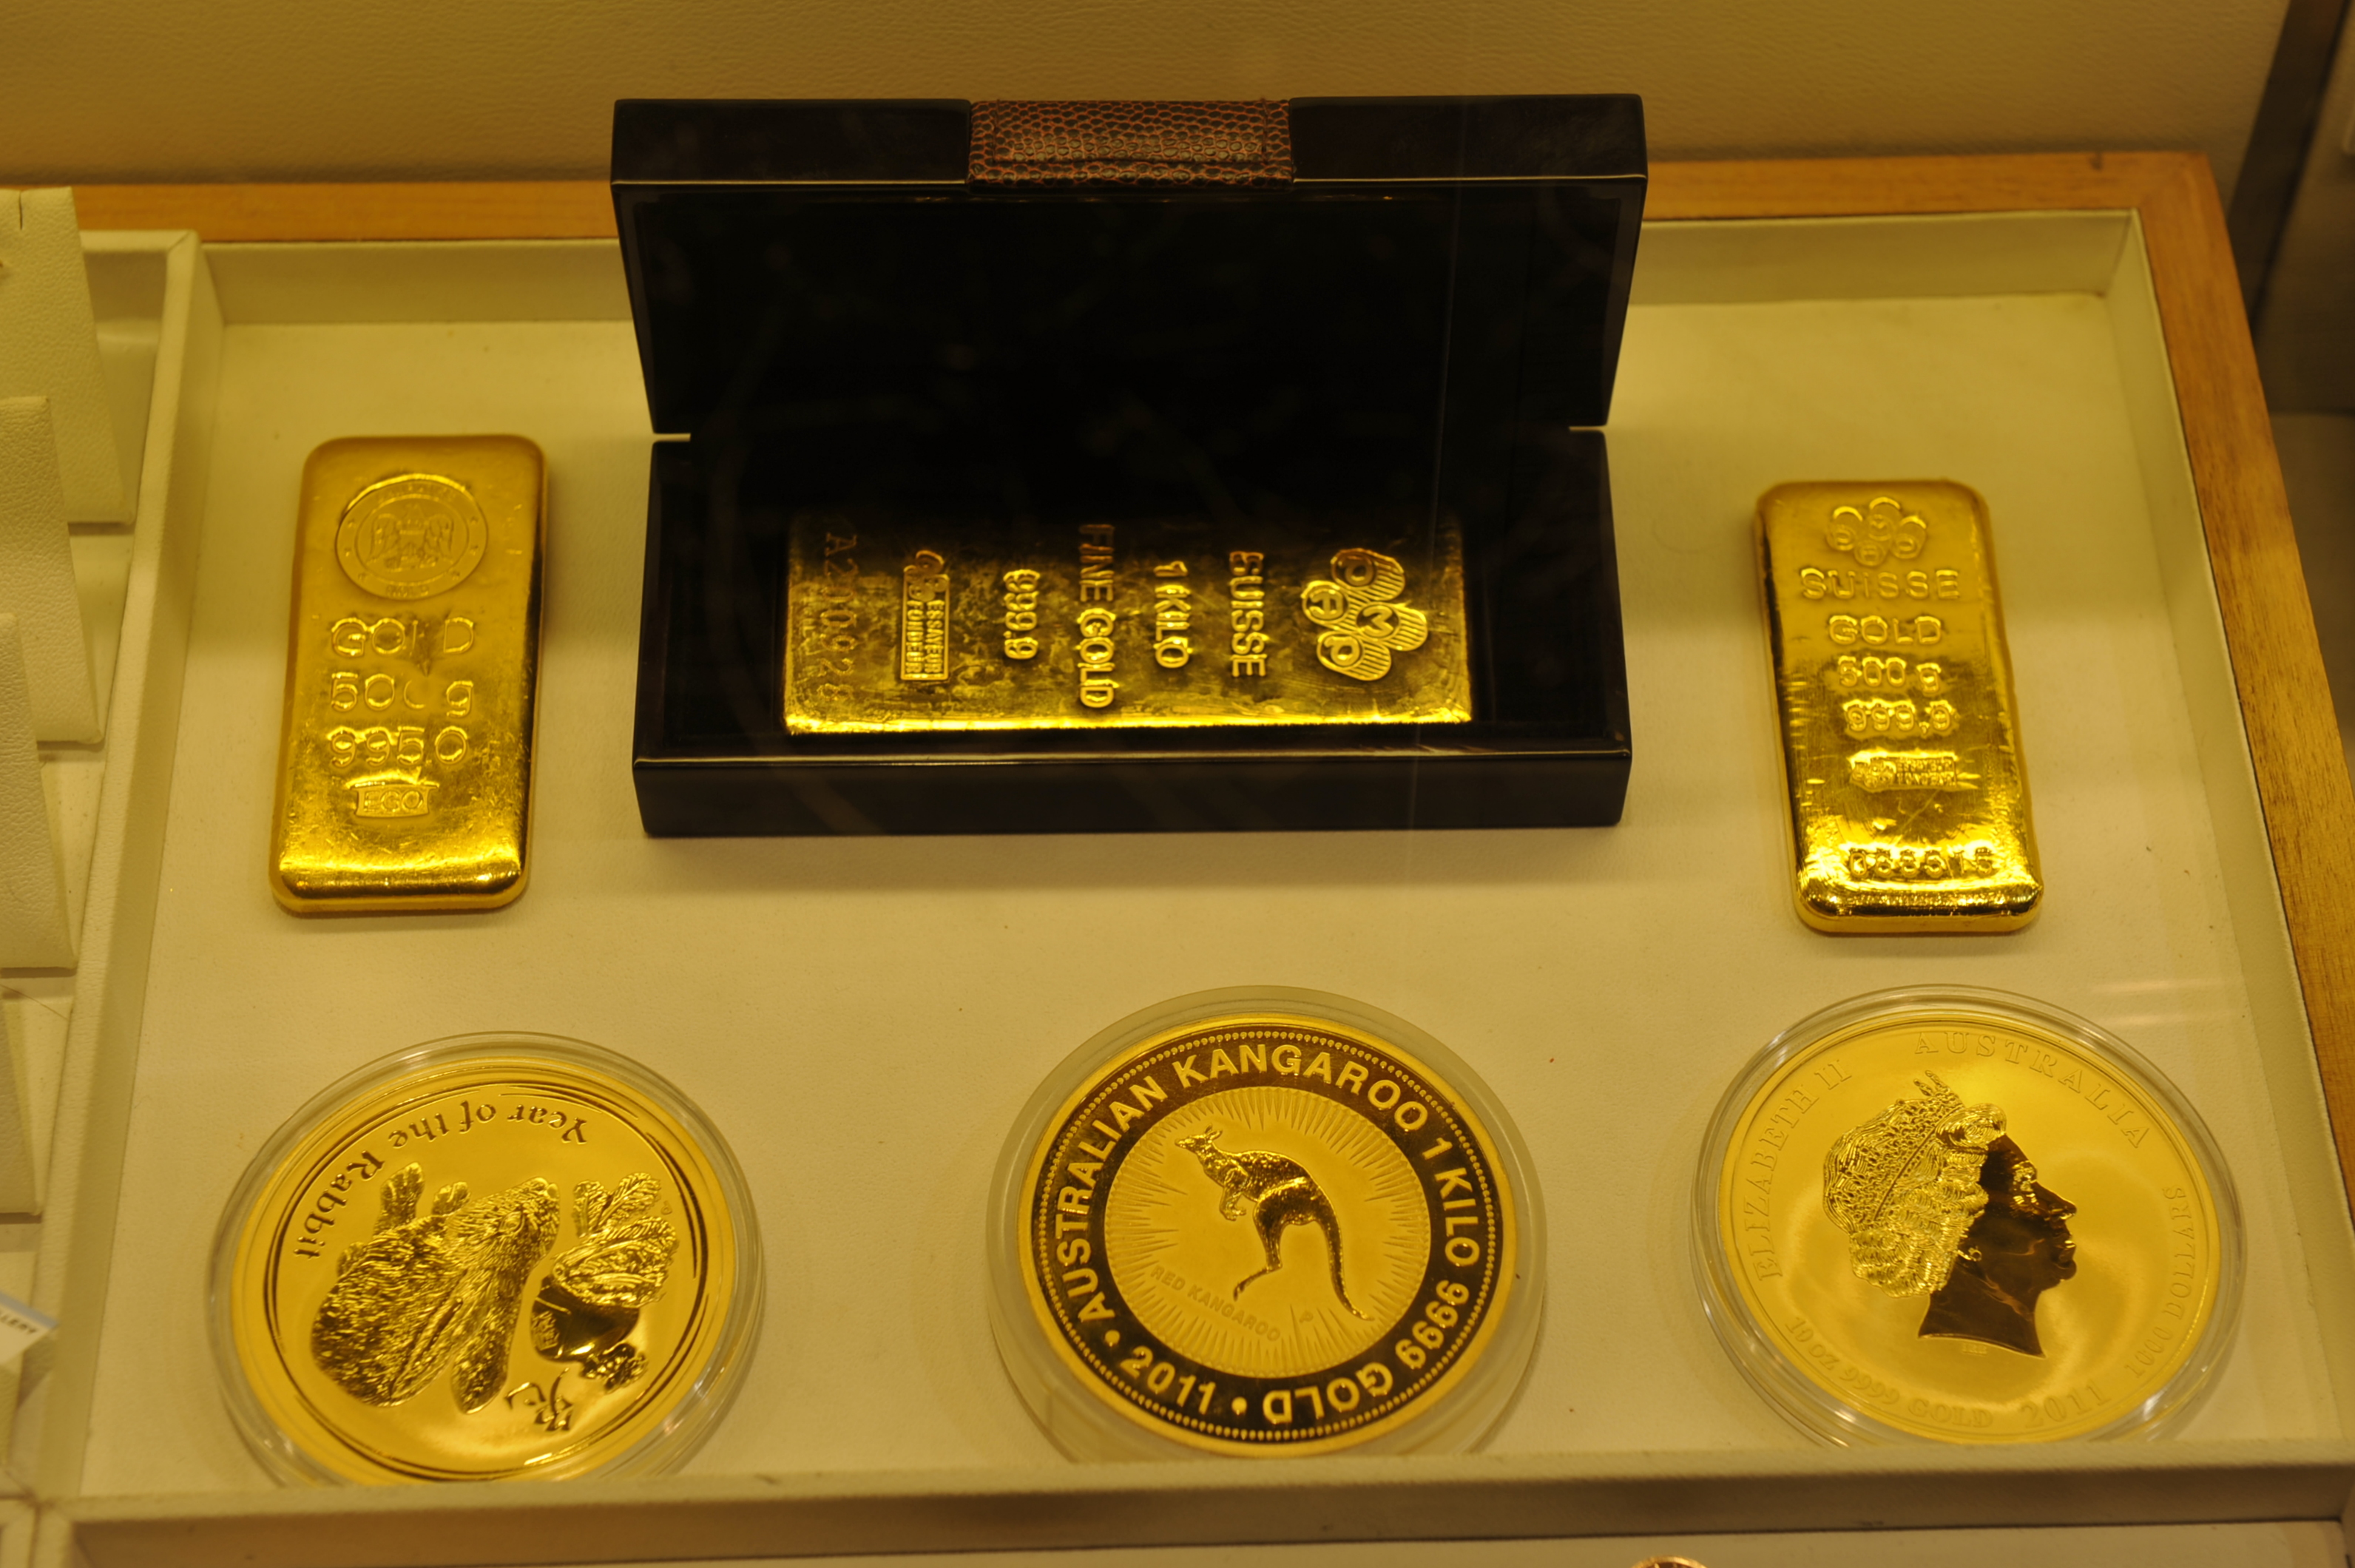 Gold bars or gold coins.